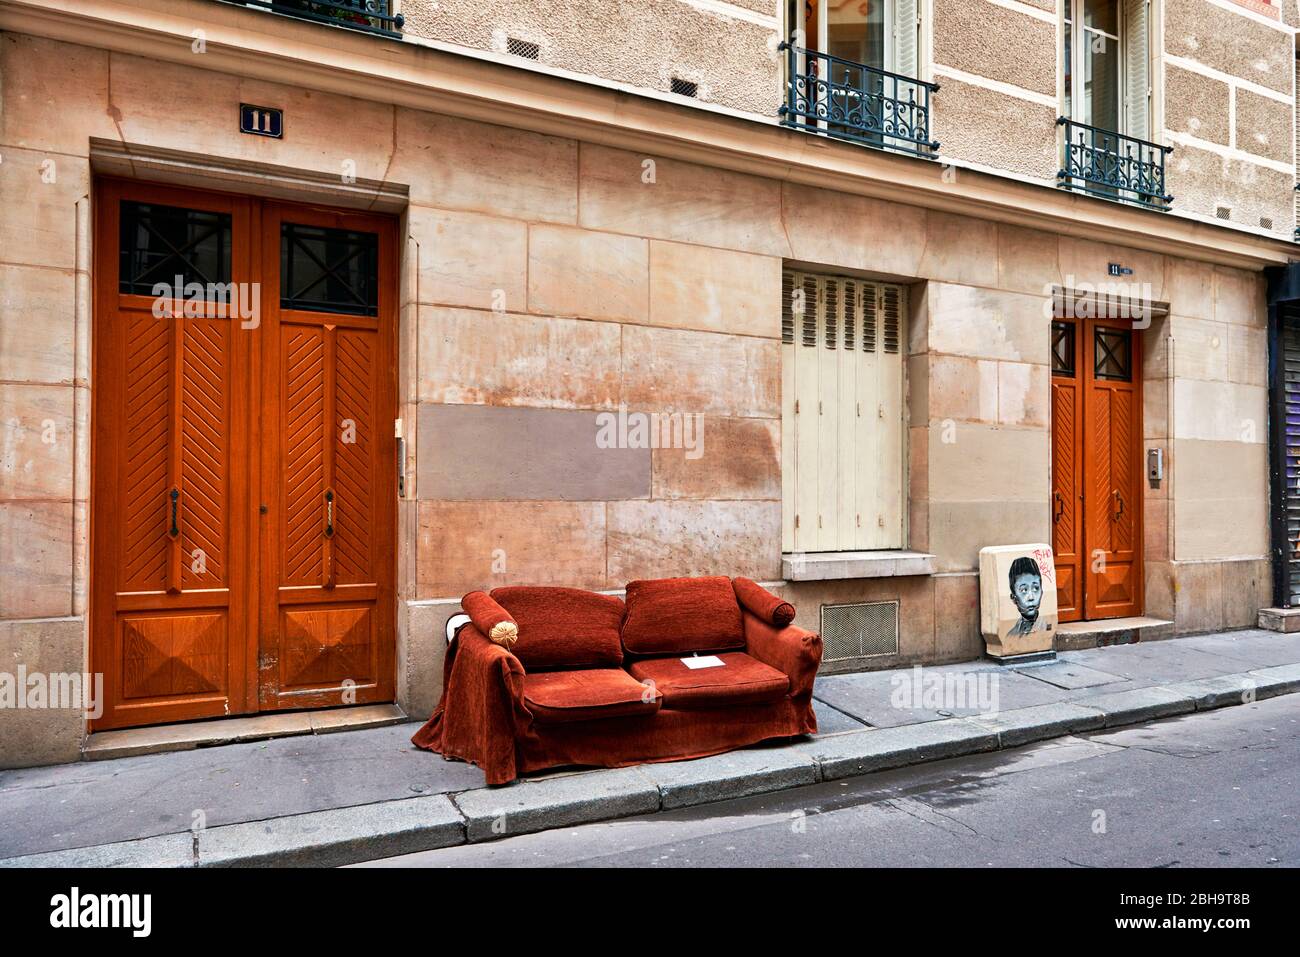 Sofa on the street in front of a building in Paris, France Stock Photo